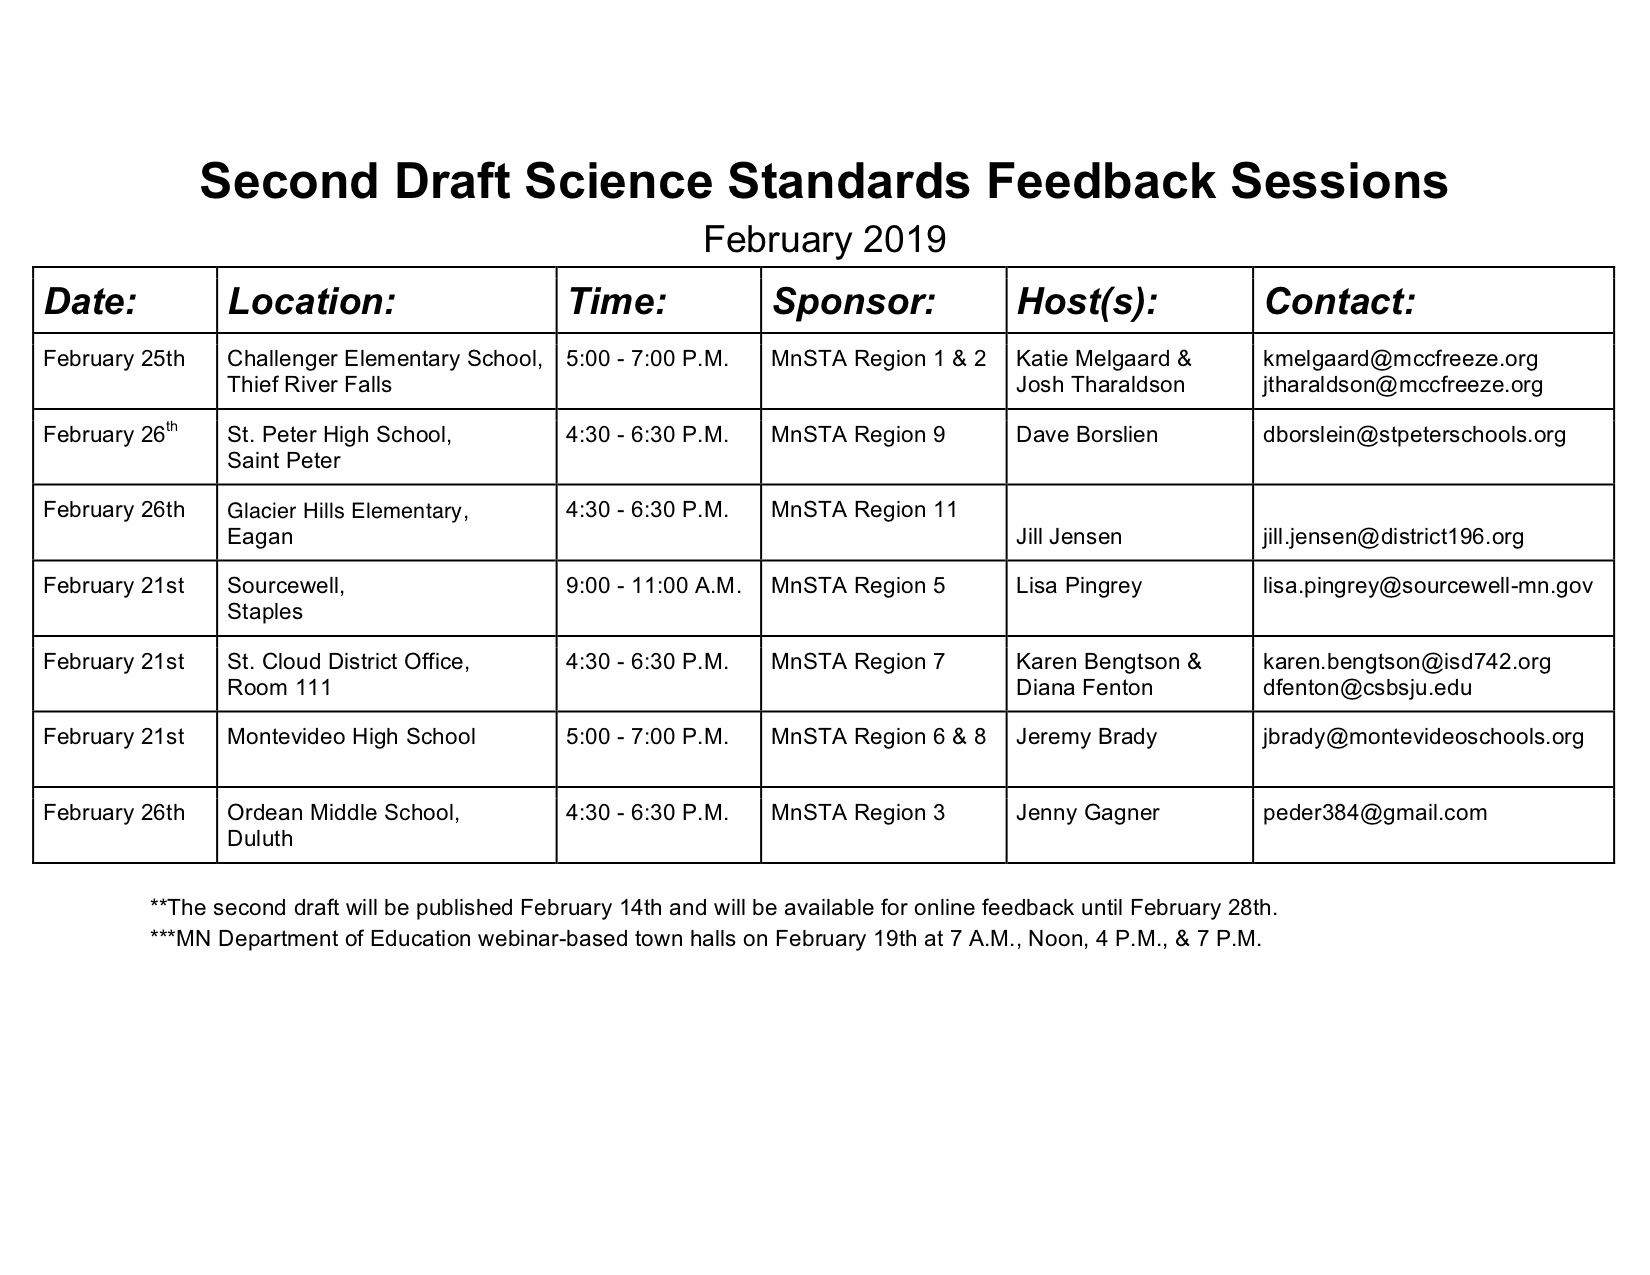 Standards Feedback Sessions revised Feb 20